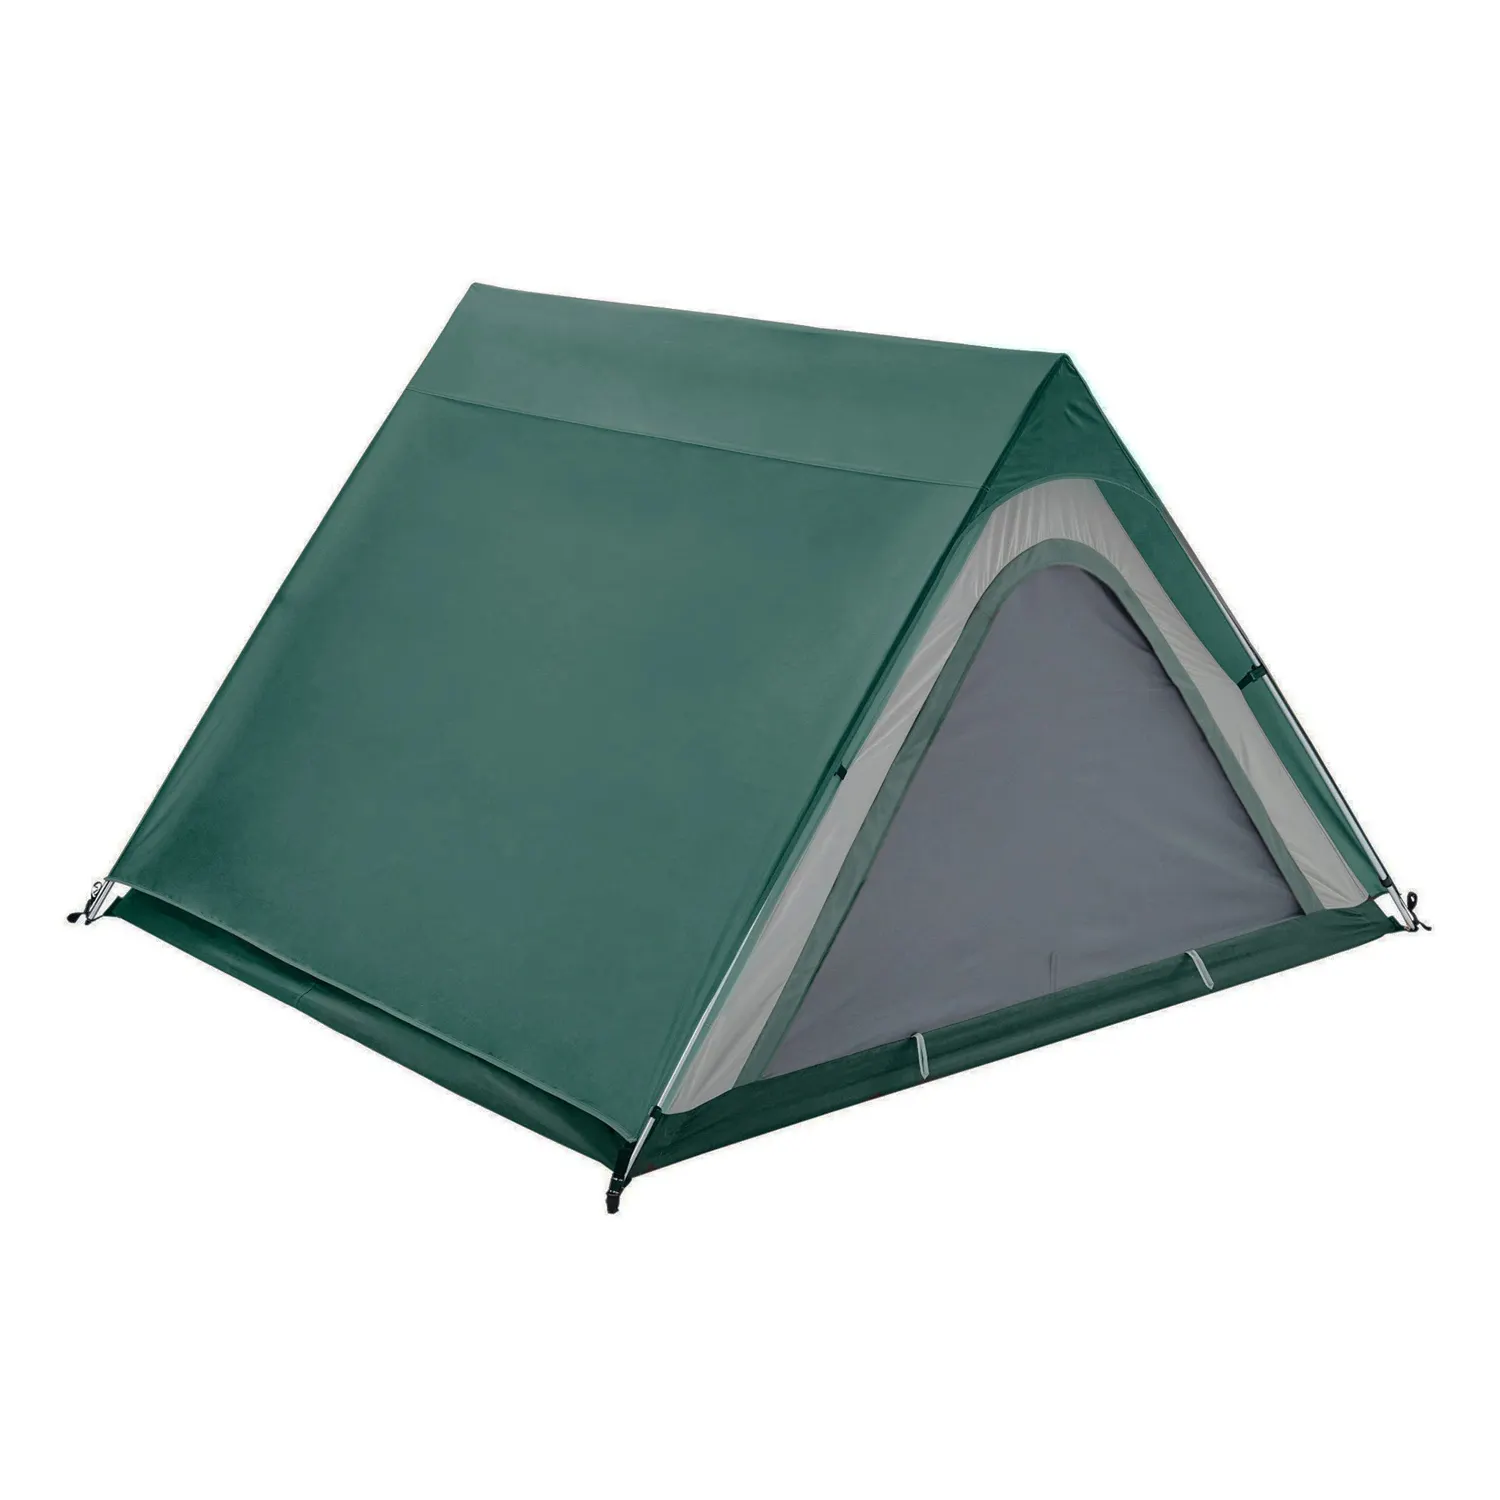 Outdoor Camping Beach Tent with A frame Shape Aluminum Triangle Hiking Tent All Season Portable Travel Indian Adult Tent